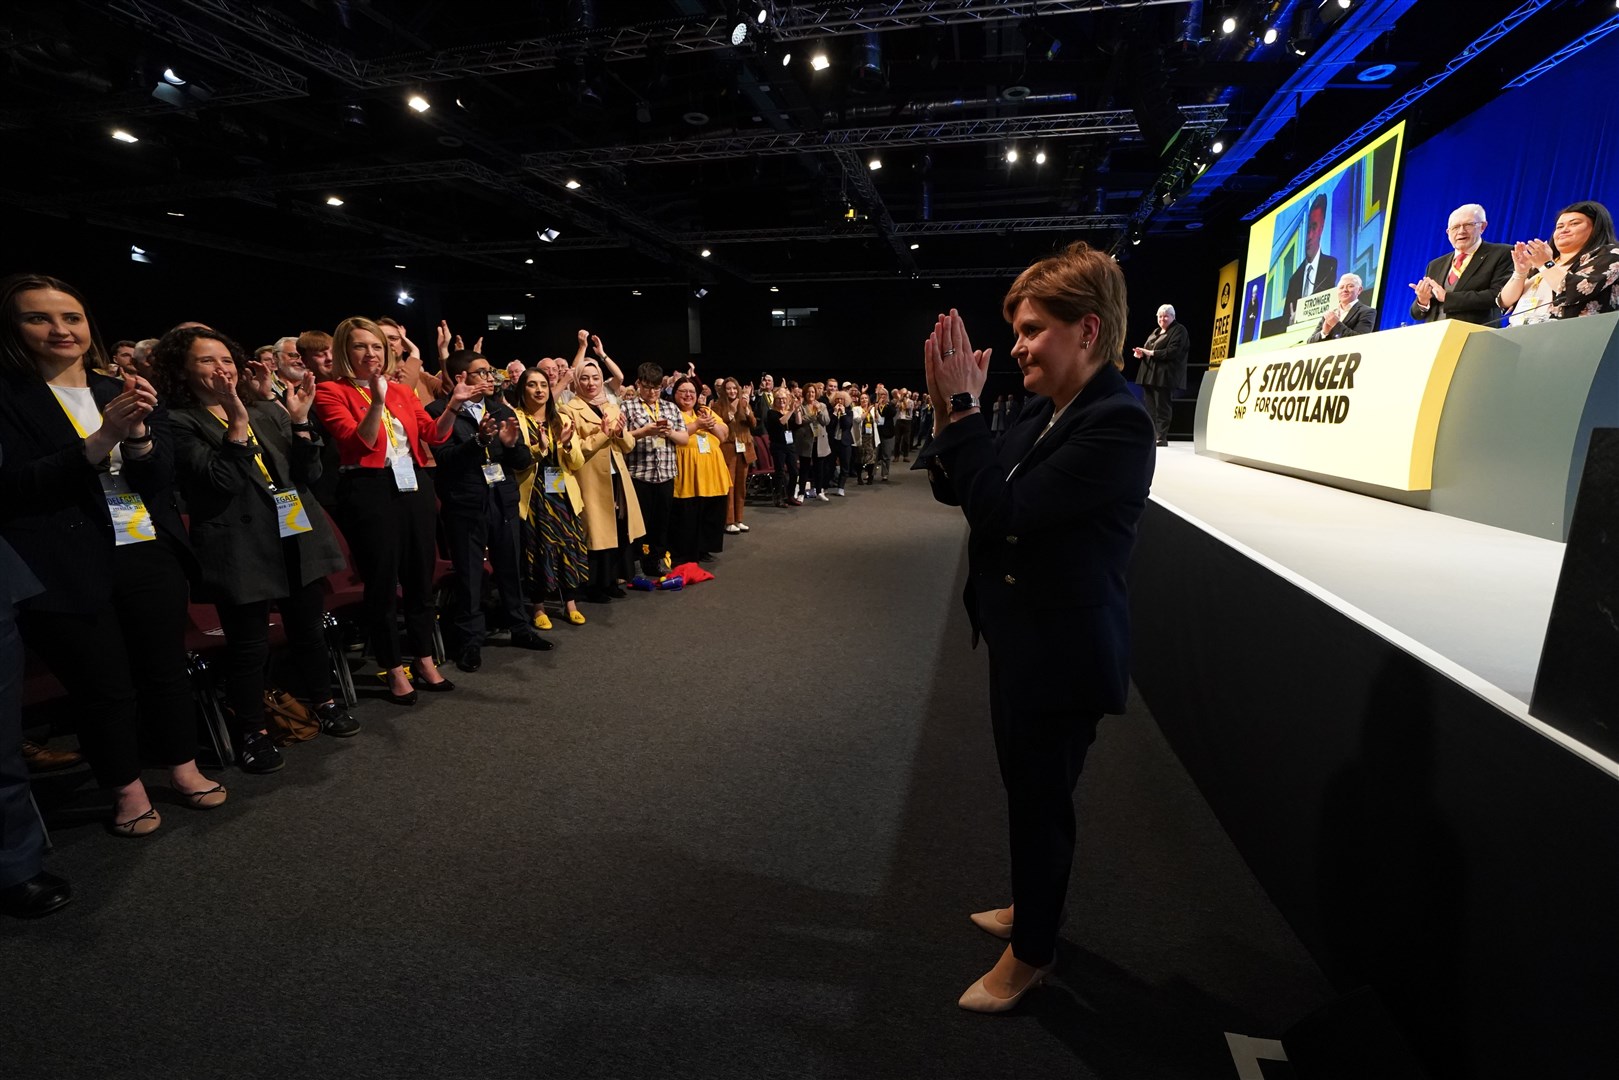 Nicola Sturgeon was given a warm welcome at the SNP annual conference in Aberdeen (Andrew Milligan/PA)